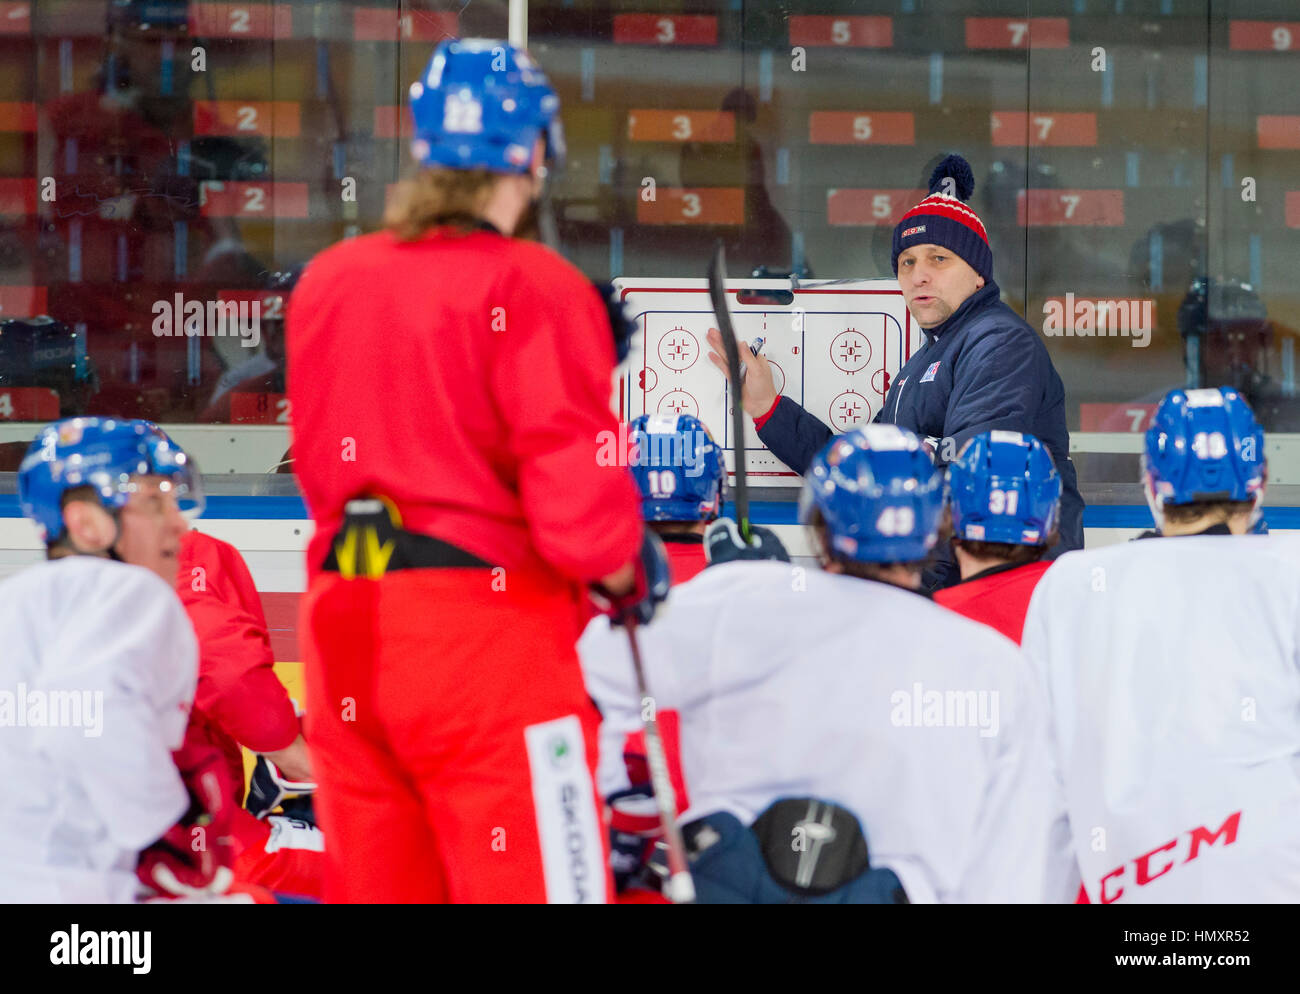 Prague, Czech Republic. 07th Feb, 2017. The Czech national ice-hockey team's coach Josef Jandac in action during the training session prior to the February Sweden Games in Gothenburg in Prague, Czech Republic, February 7, 2017. Sweden Games, the third part of the European Hockey Tour (EHT) series, will take place on February 9-12. Credit: Vit Simanek/CTK Photo/Alamy Live News Stock Photo